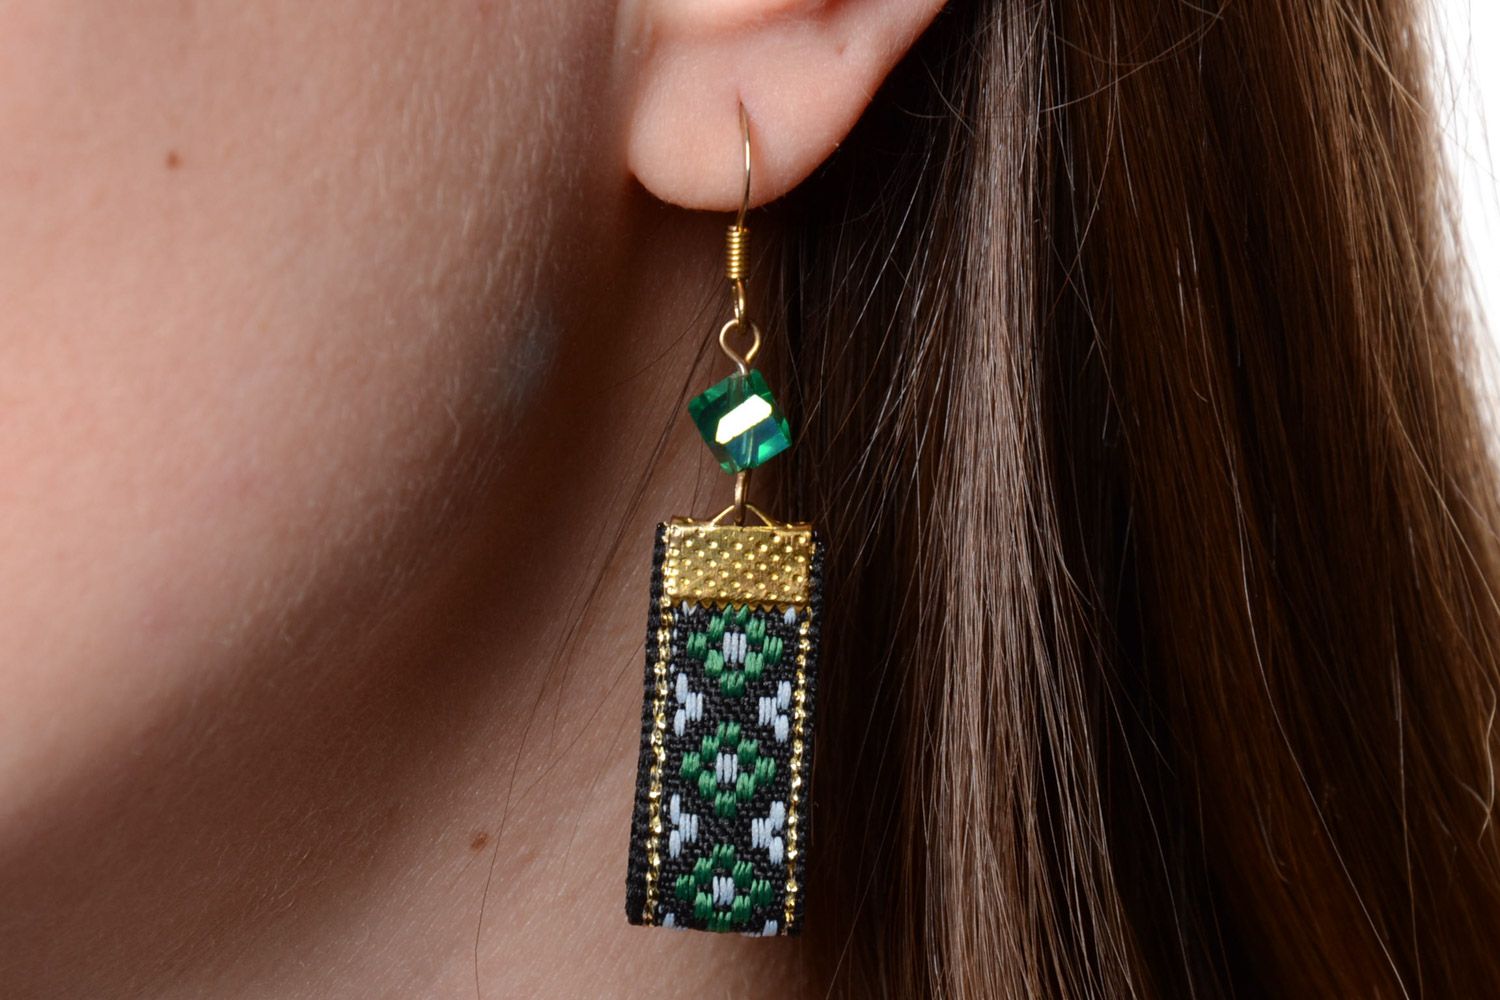 Handmade green earrings in ethnic style made of lace photo 5